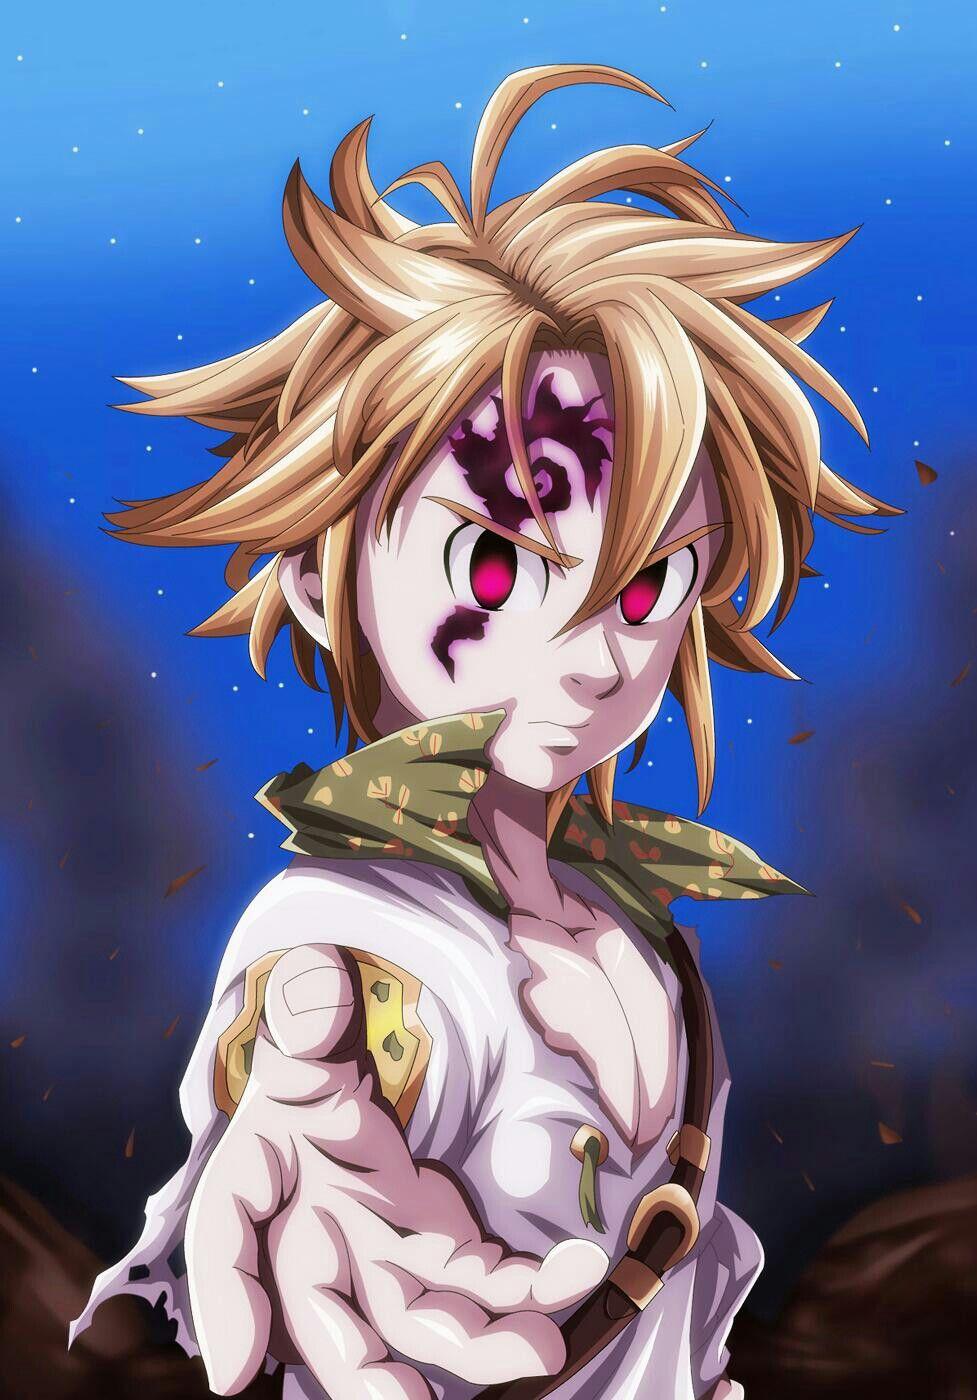 Meliodas is the best anime character. Anime. Seven deadly